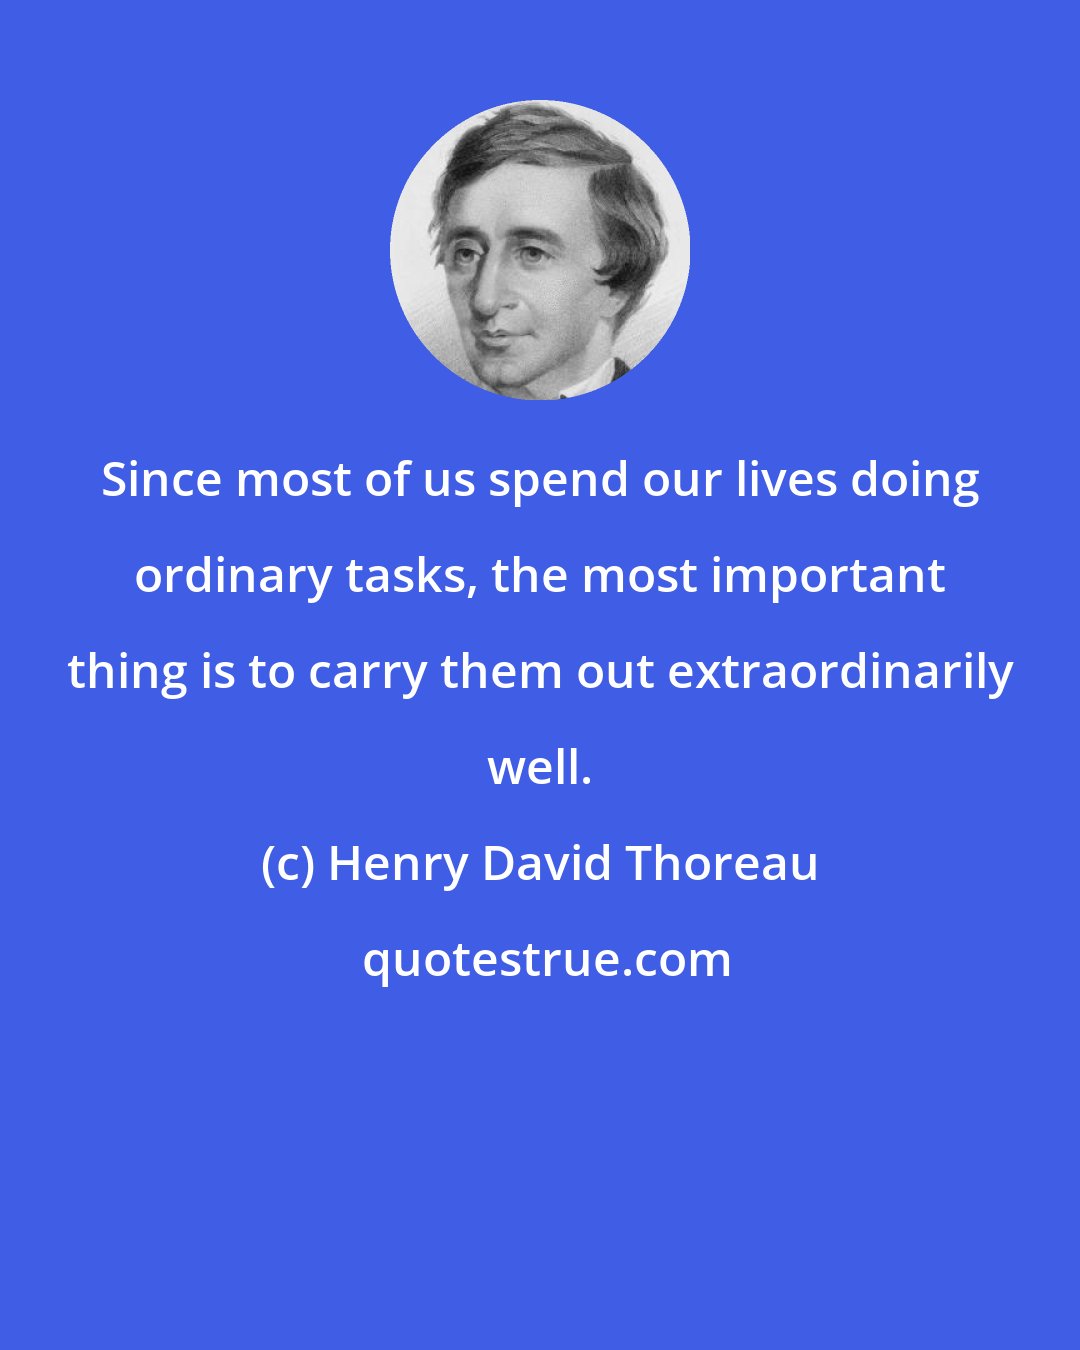 Henry David Thoreau: Since most of us spend our lives doing ordinary tasks, the most important thing is to carry them out extraordinarily well.